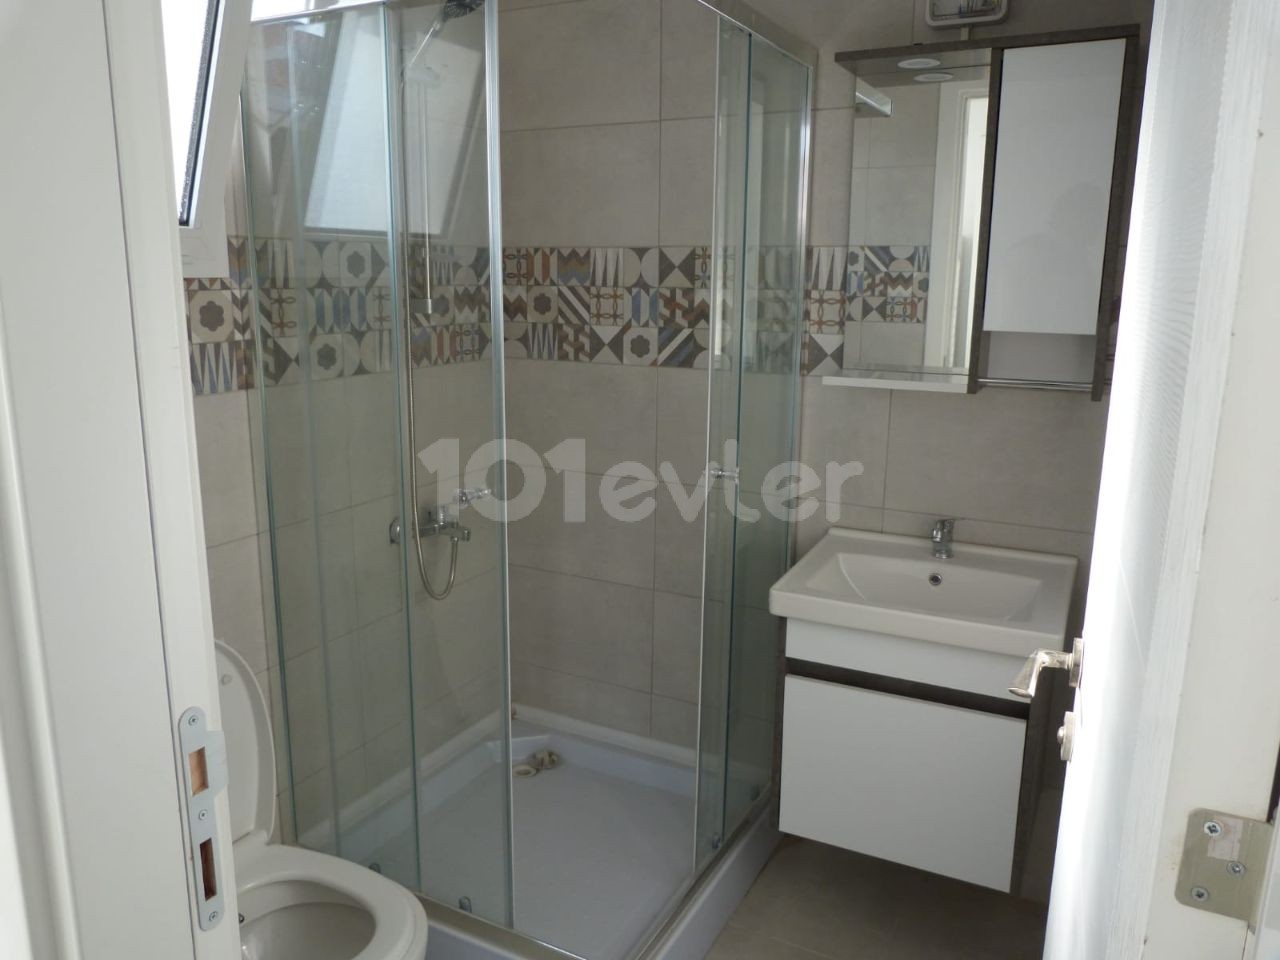 Studio Apartment for Rent in Central Famagusta ** 